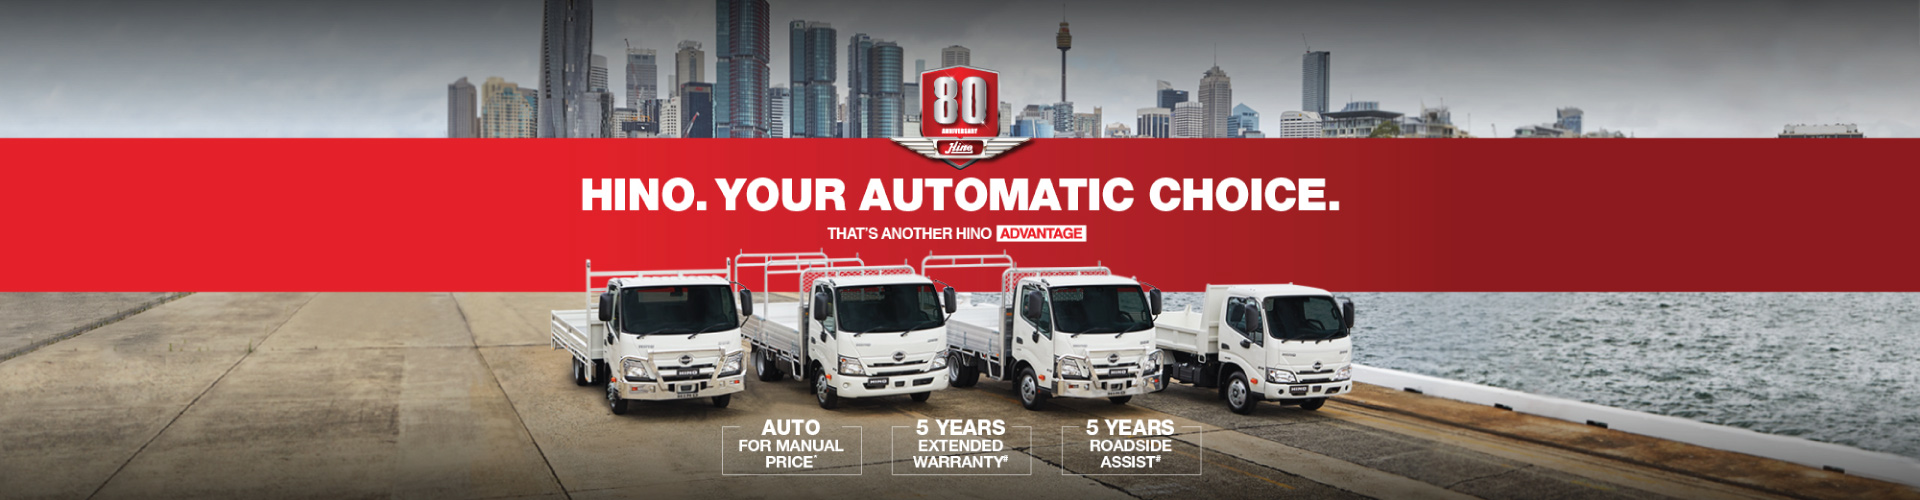 Hino Your Automatic Choice